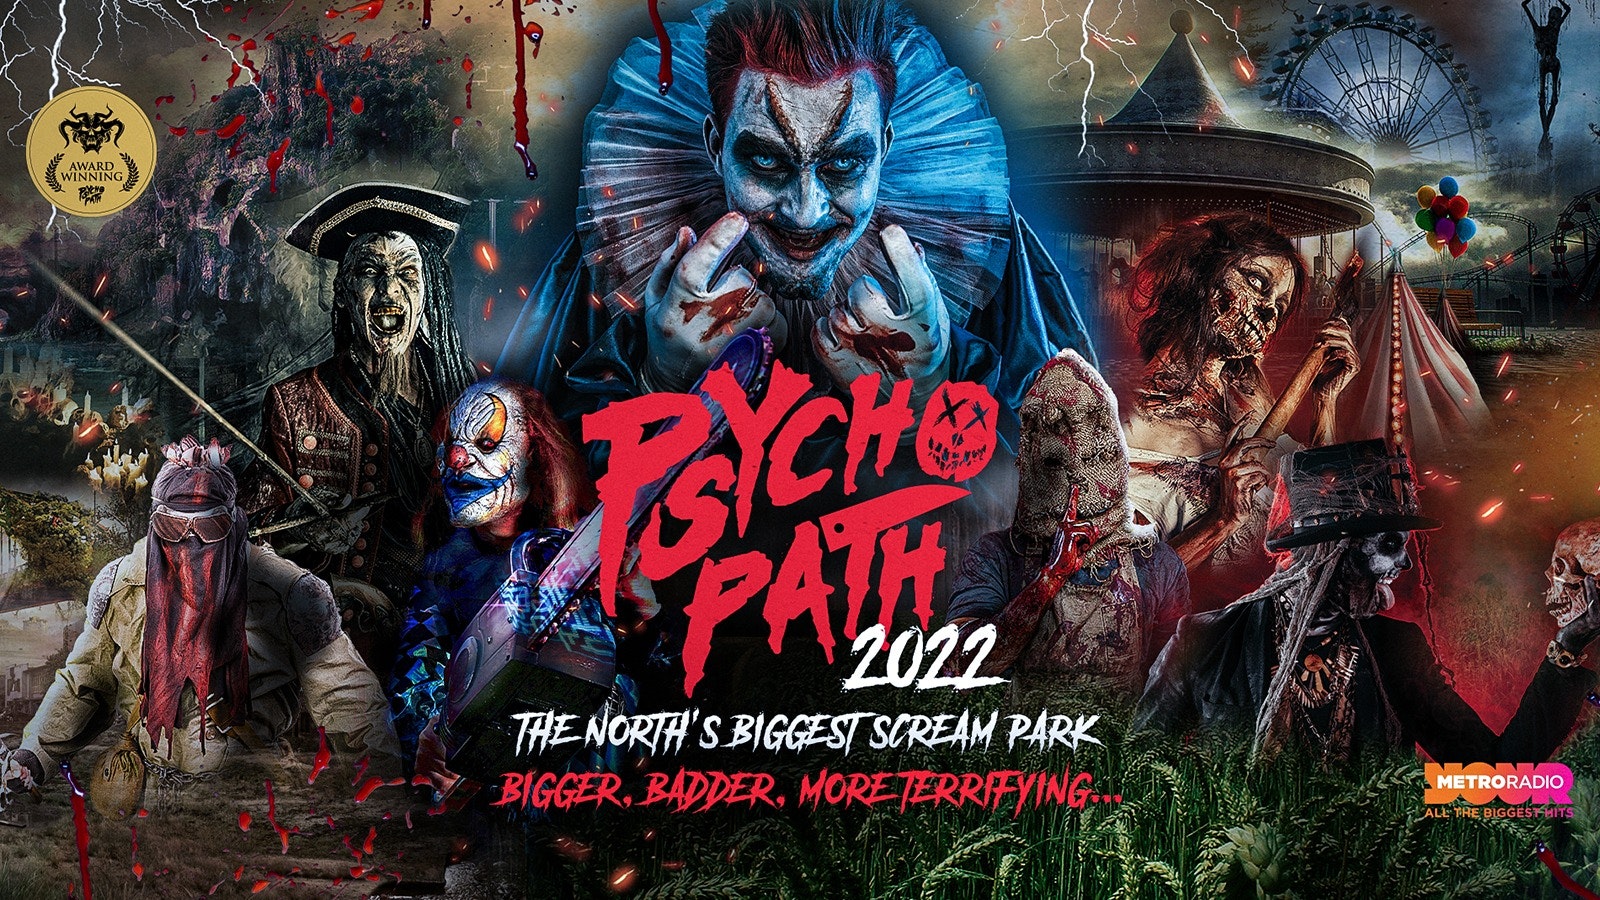 Psycho Path Presents FearGround – Oct 29th